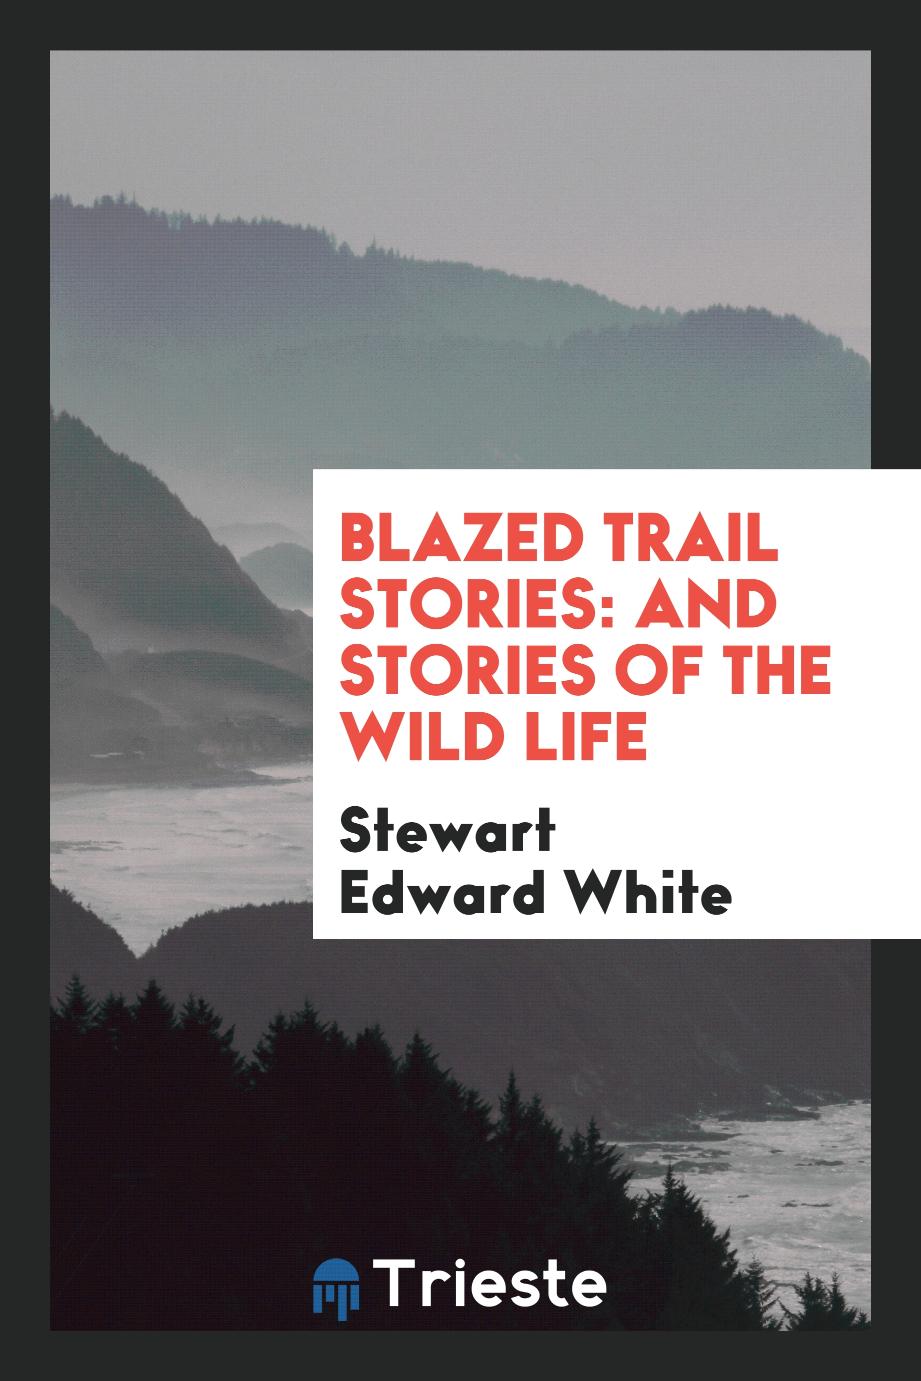 Blazed Trail Stories: And Stories of the Wild Life